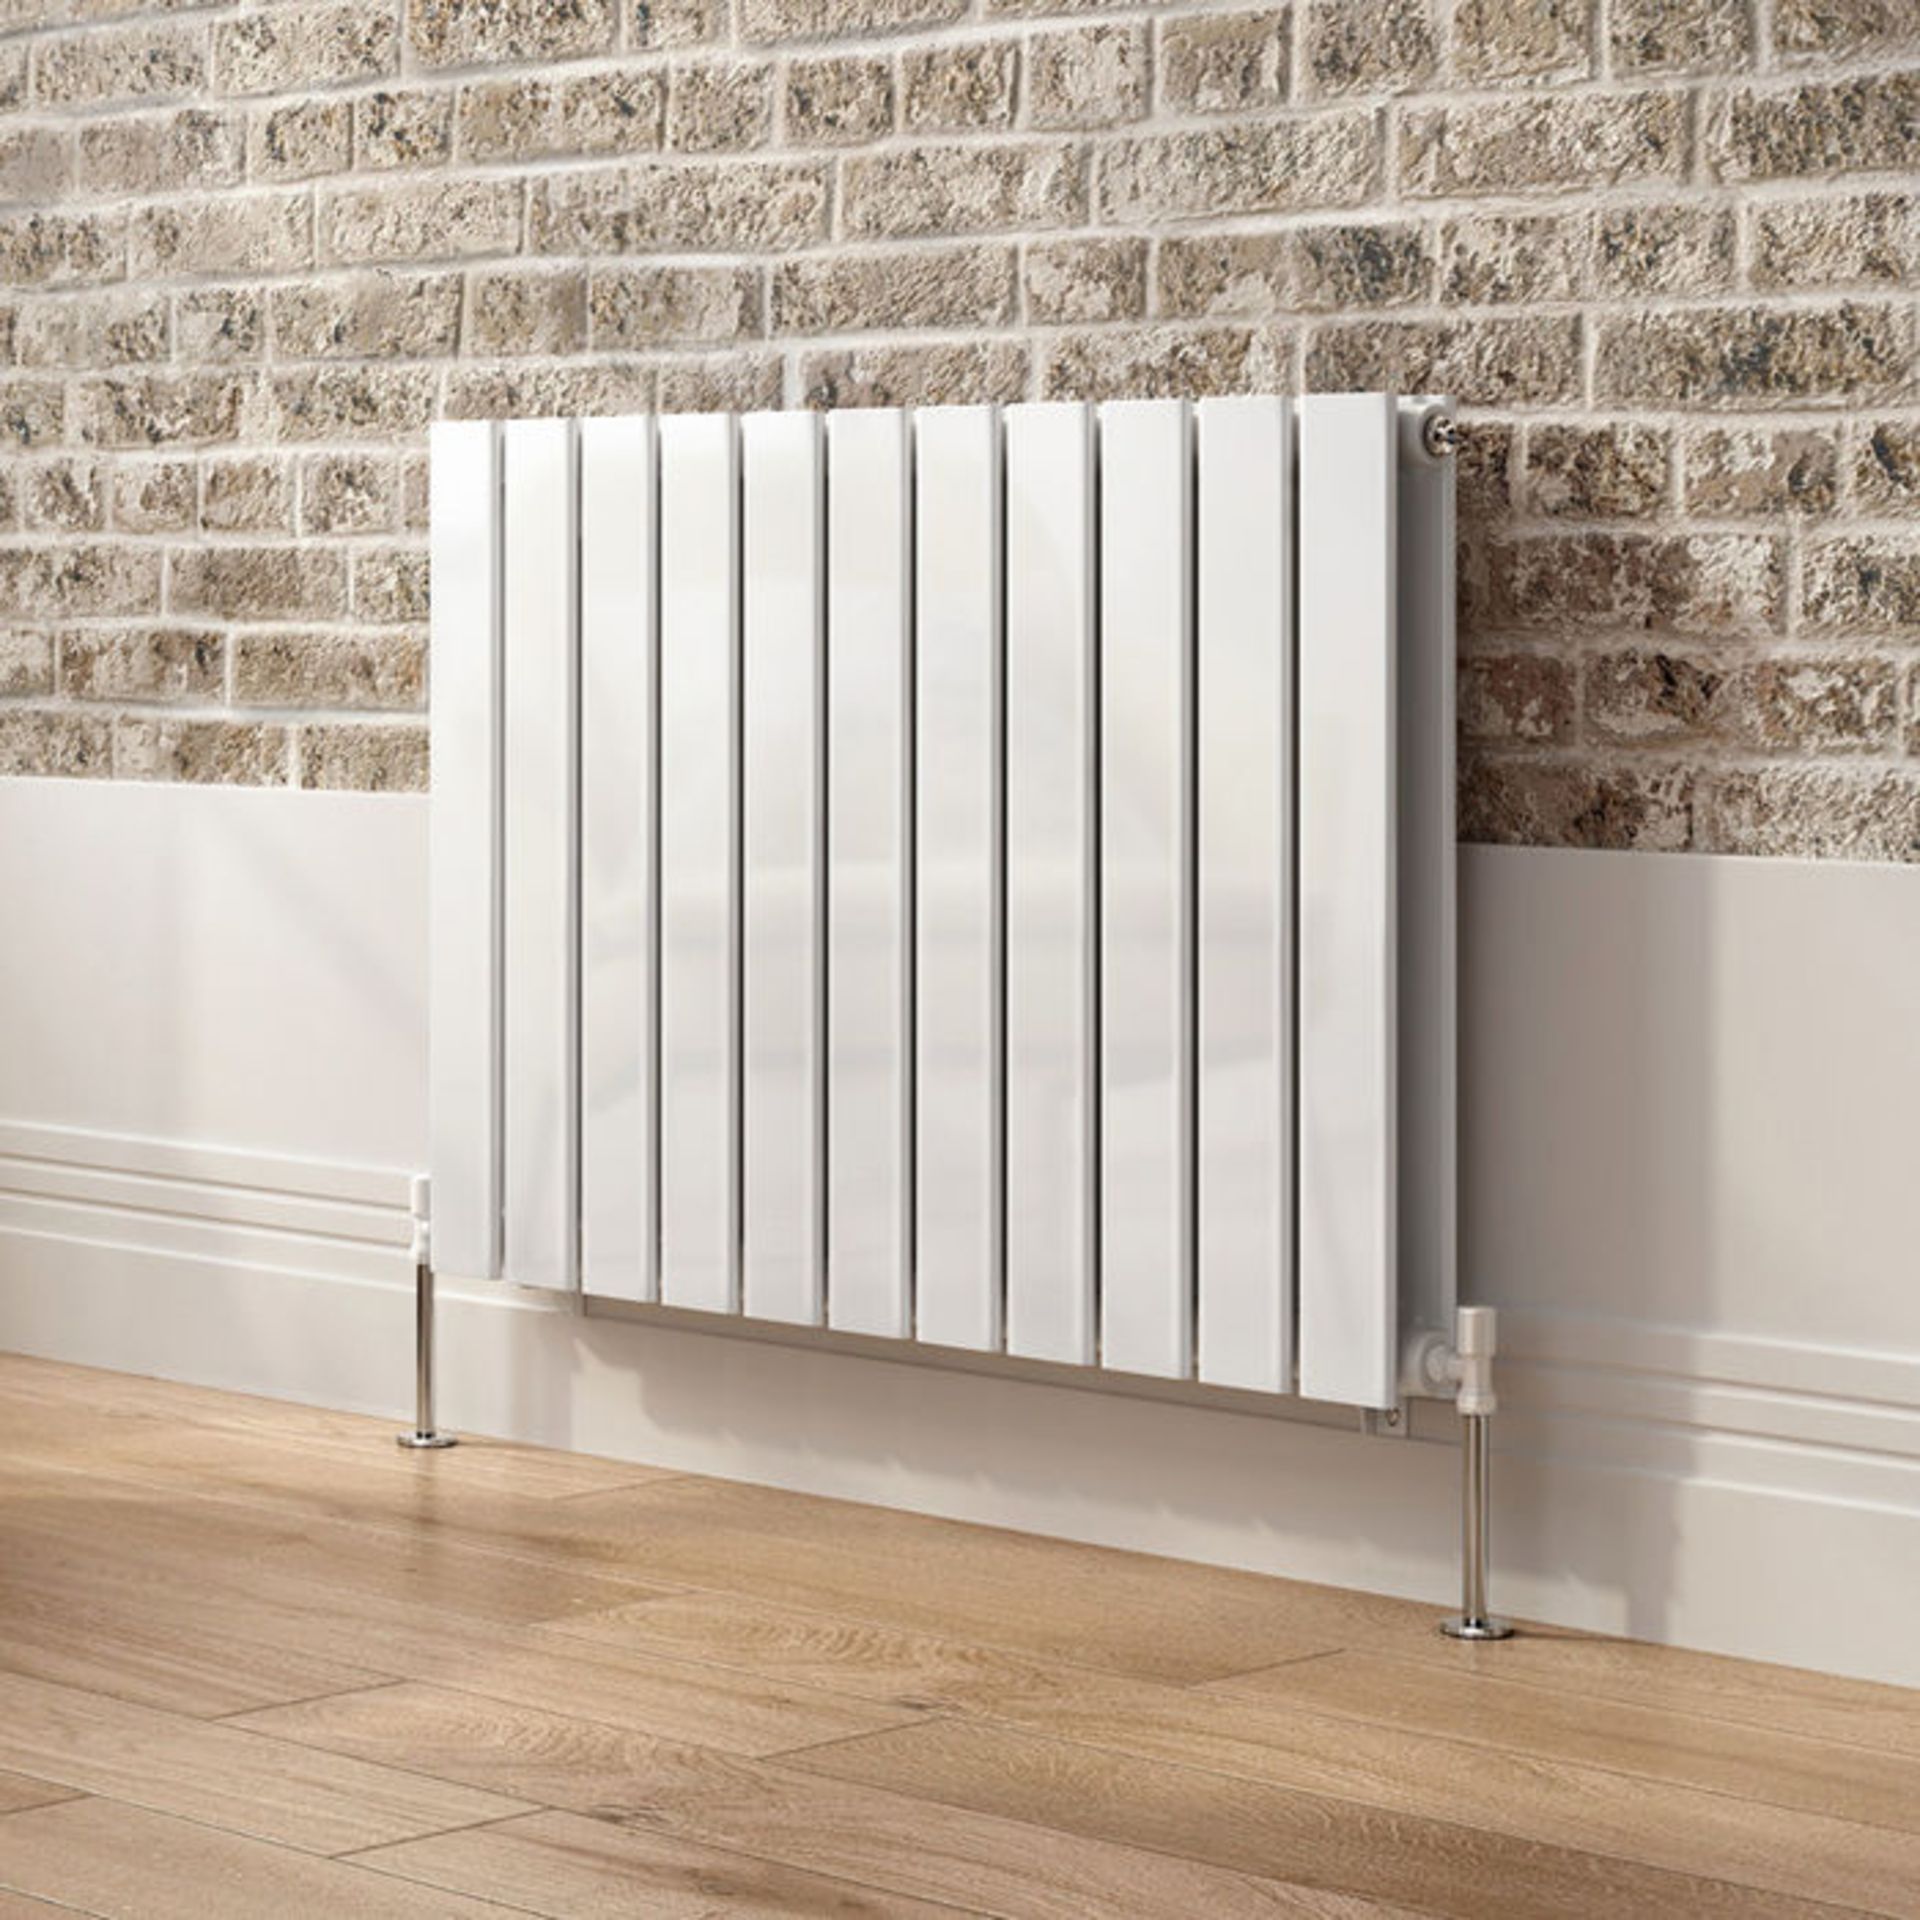 600x830mm Gloss White Double Flat Panel Horizontal Radiator. RRP £474.99. RC221. Made with hig... - Image 3 of 3